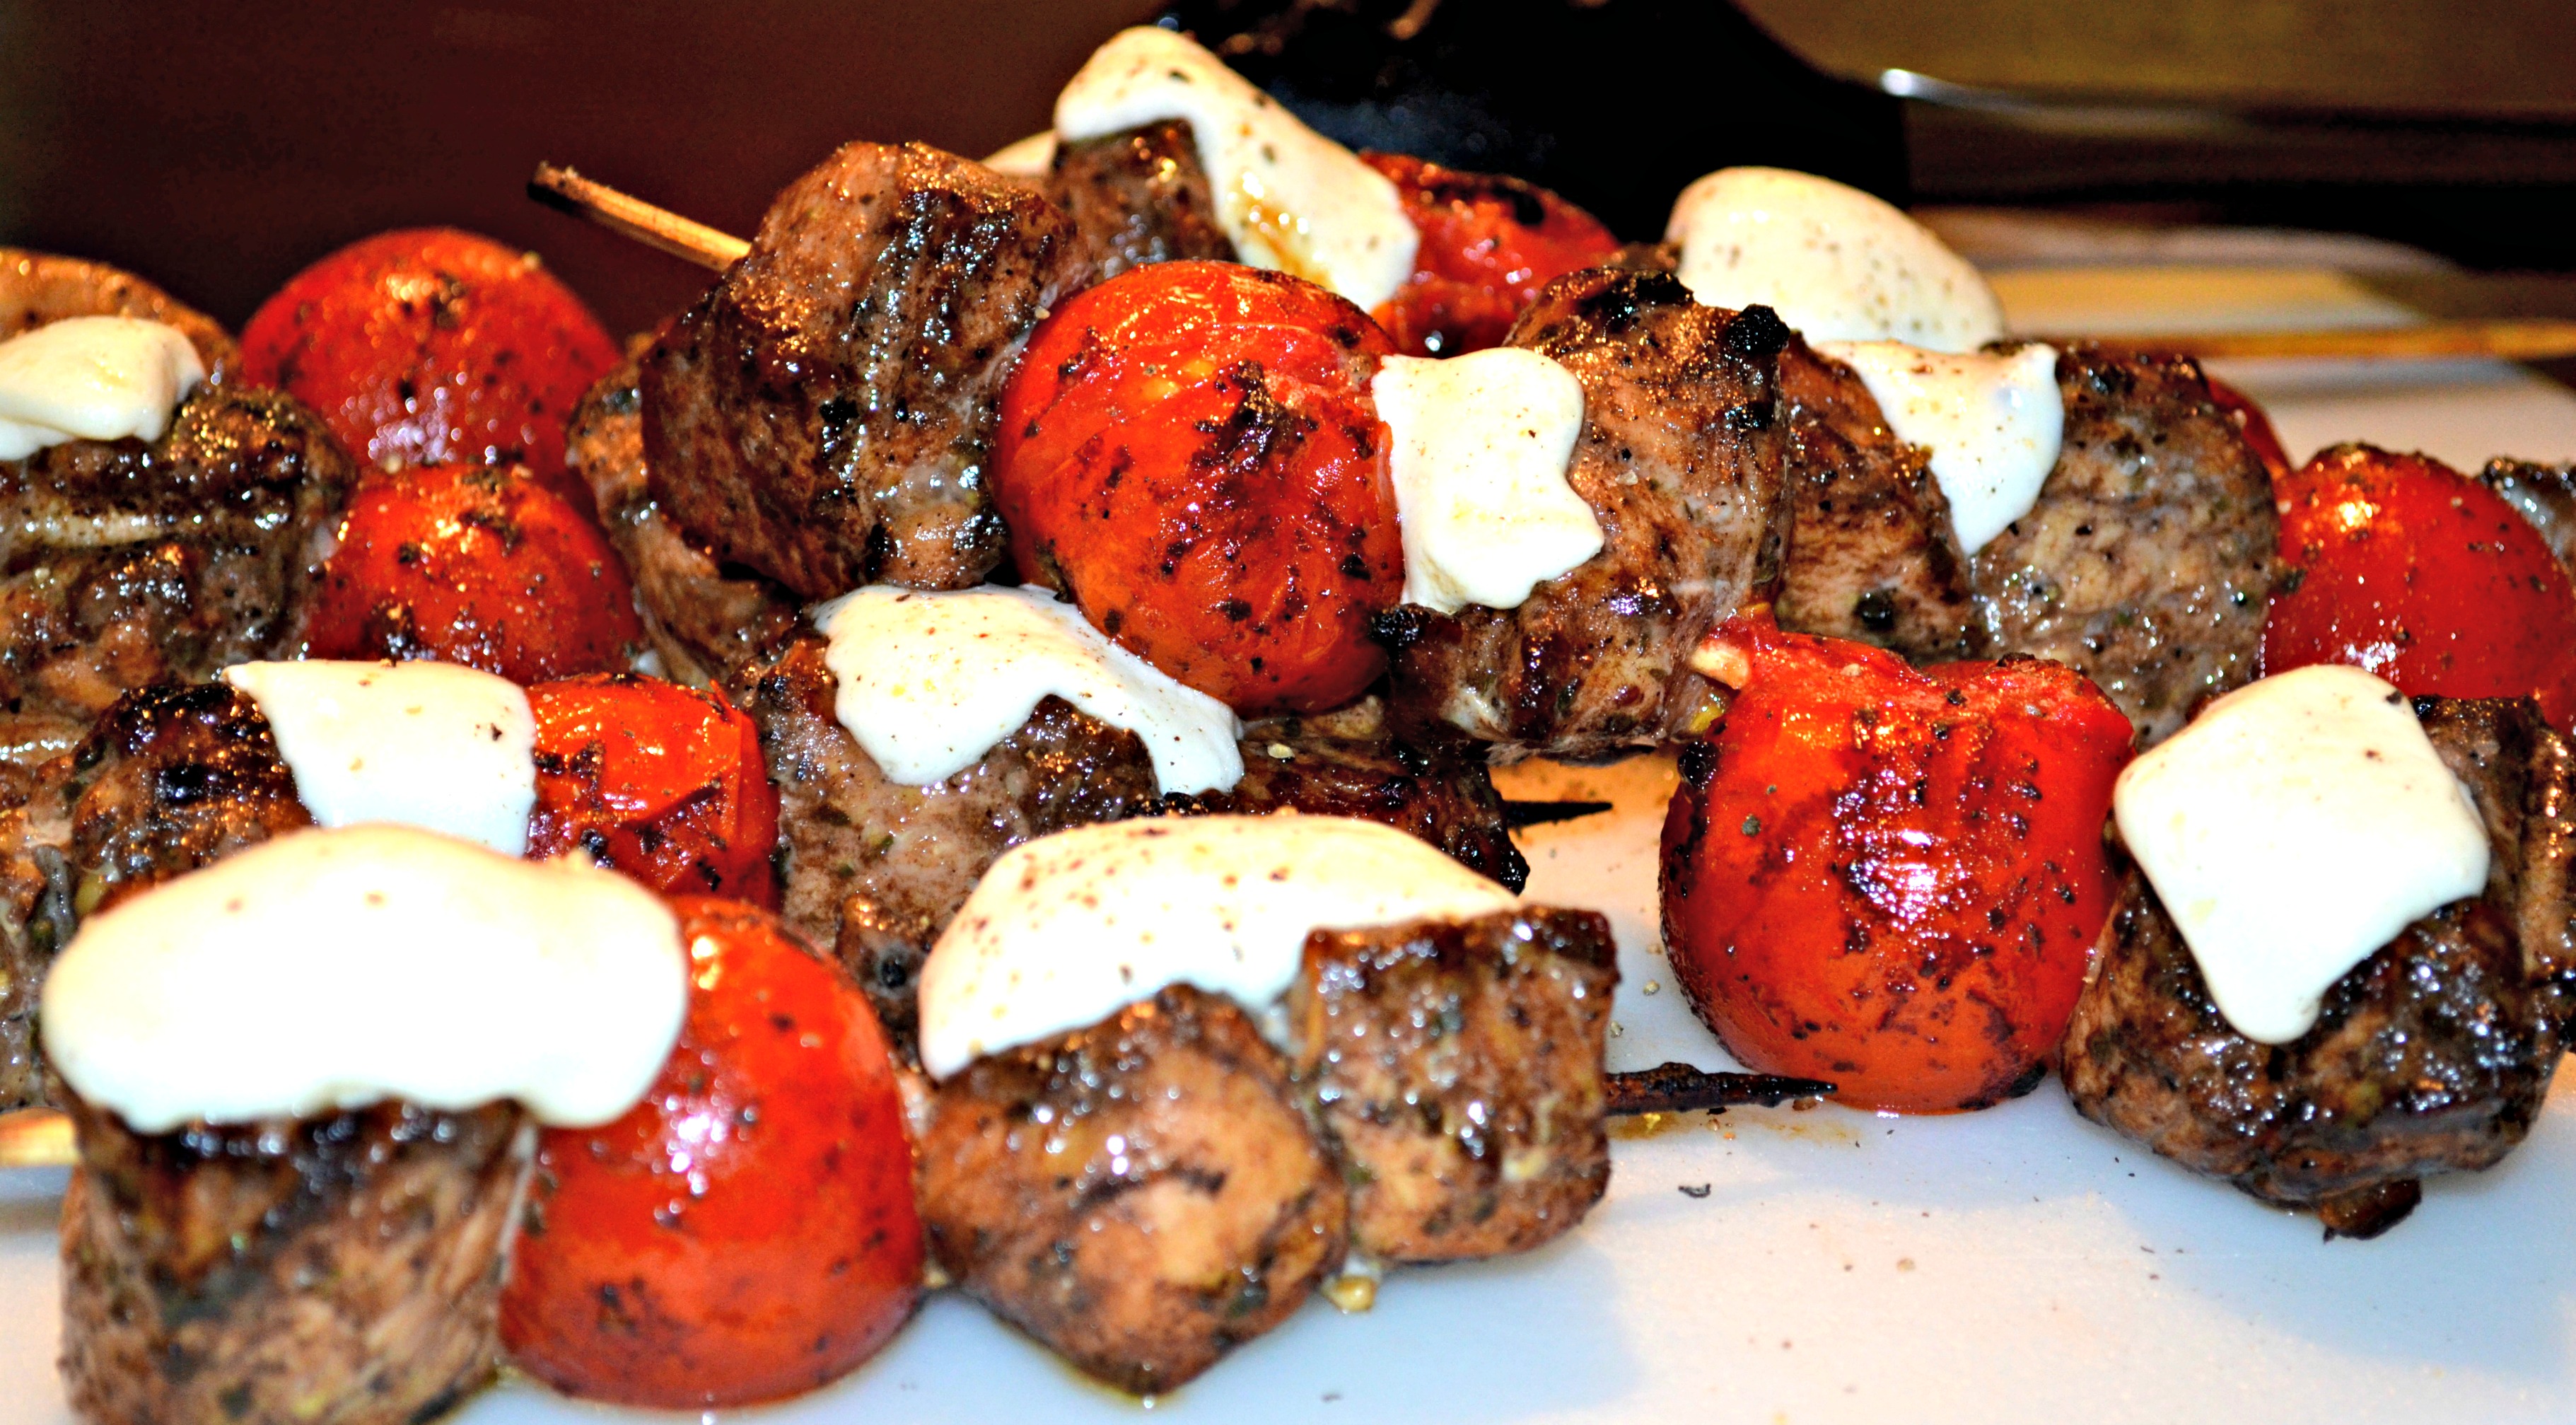 Basil Pesto and Smoked Balsamic Chicken Skewers with Melted Mozzarella Cheese